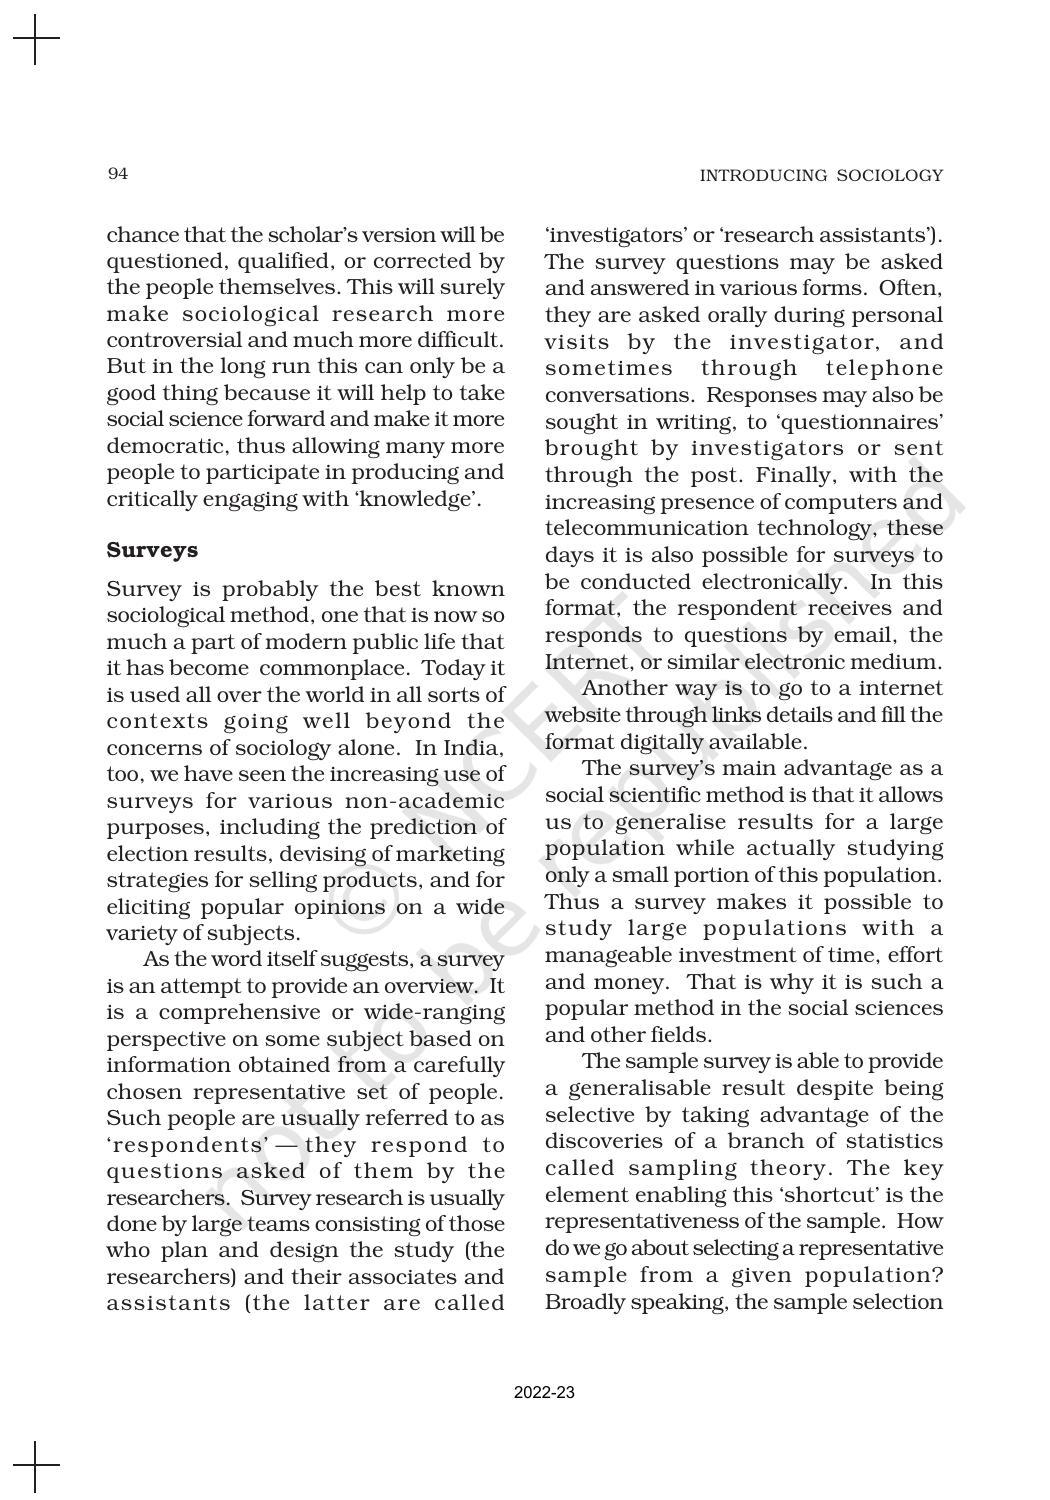 NCERT Book for Class 11 Sociology (Part-I) Chapter 5 Doing Sociology: Research Methods - Page 13